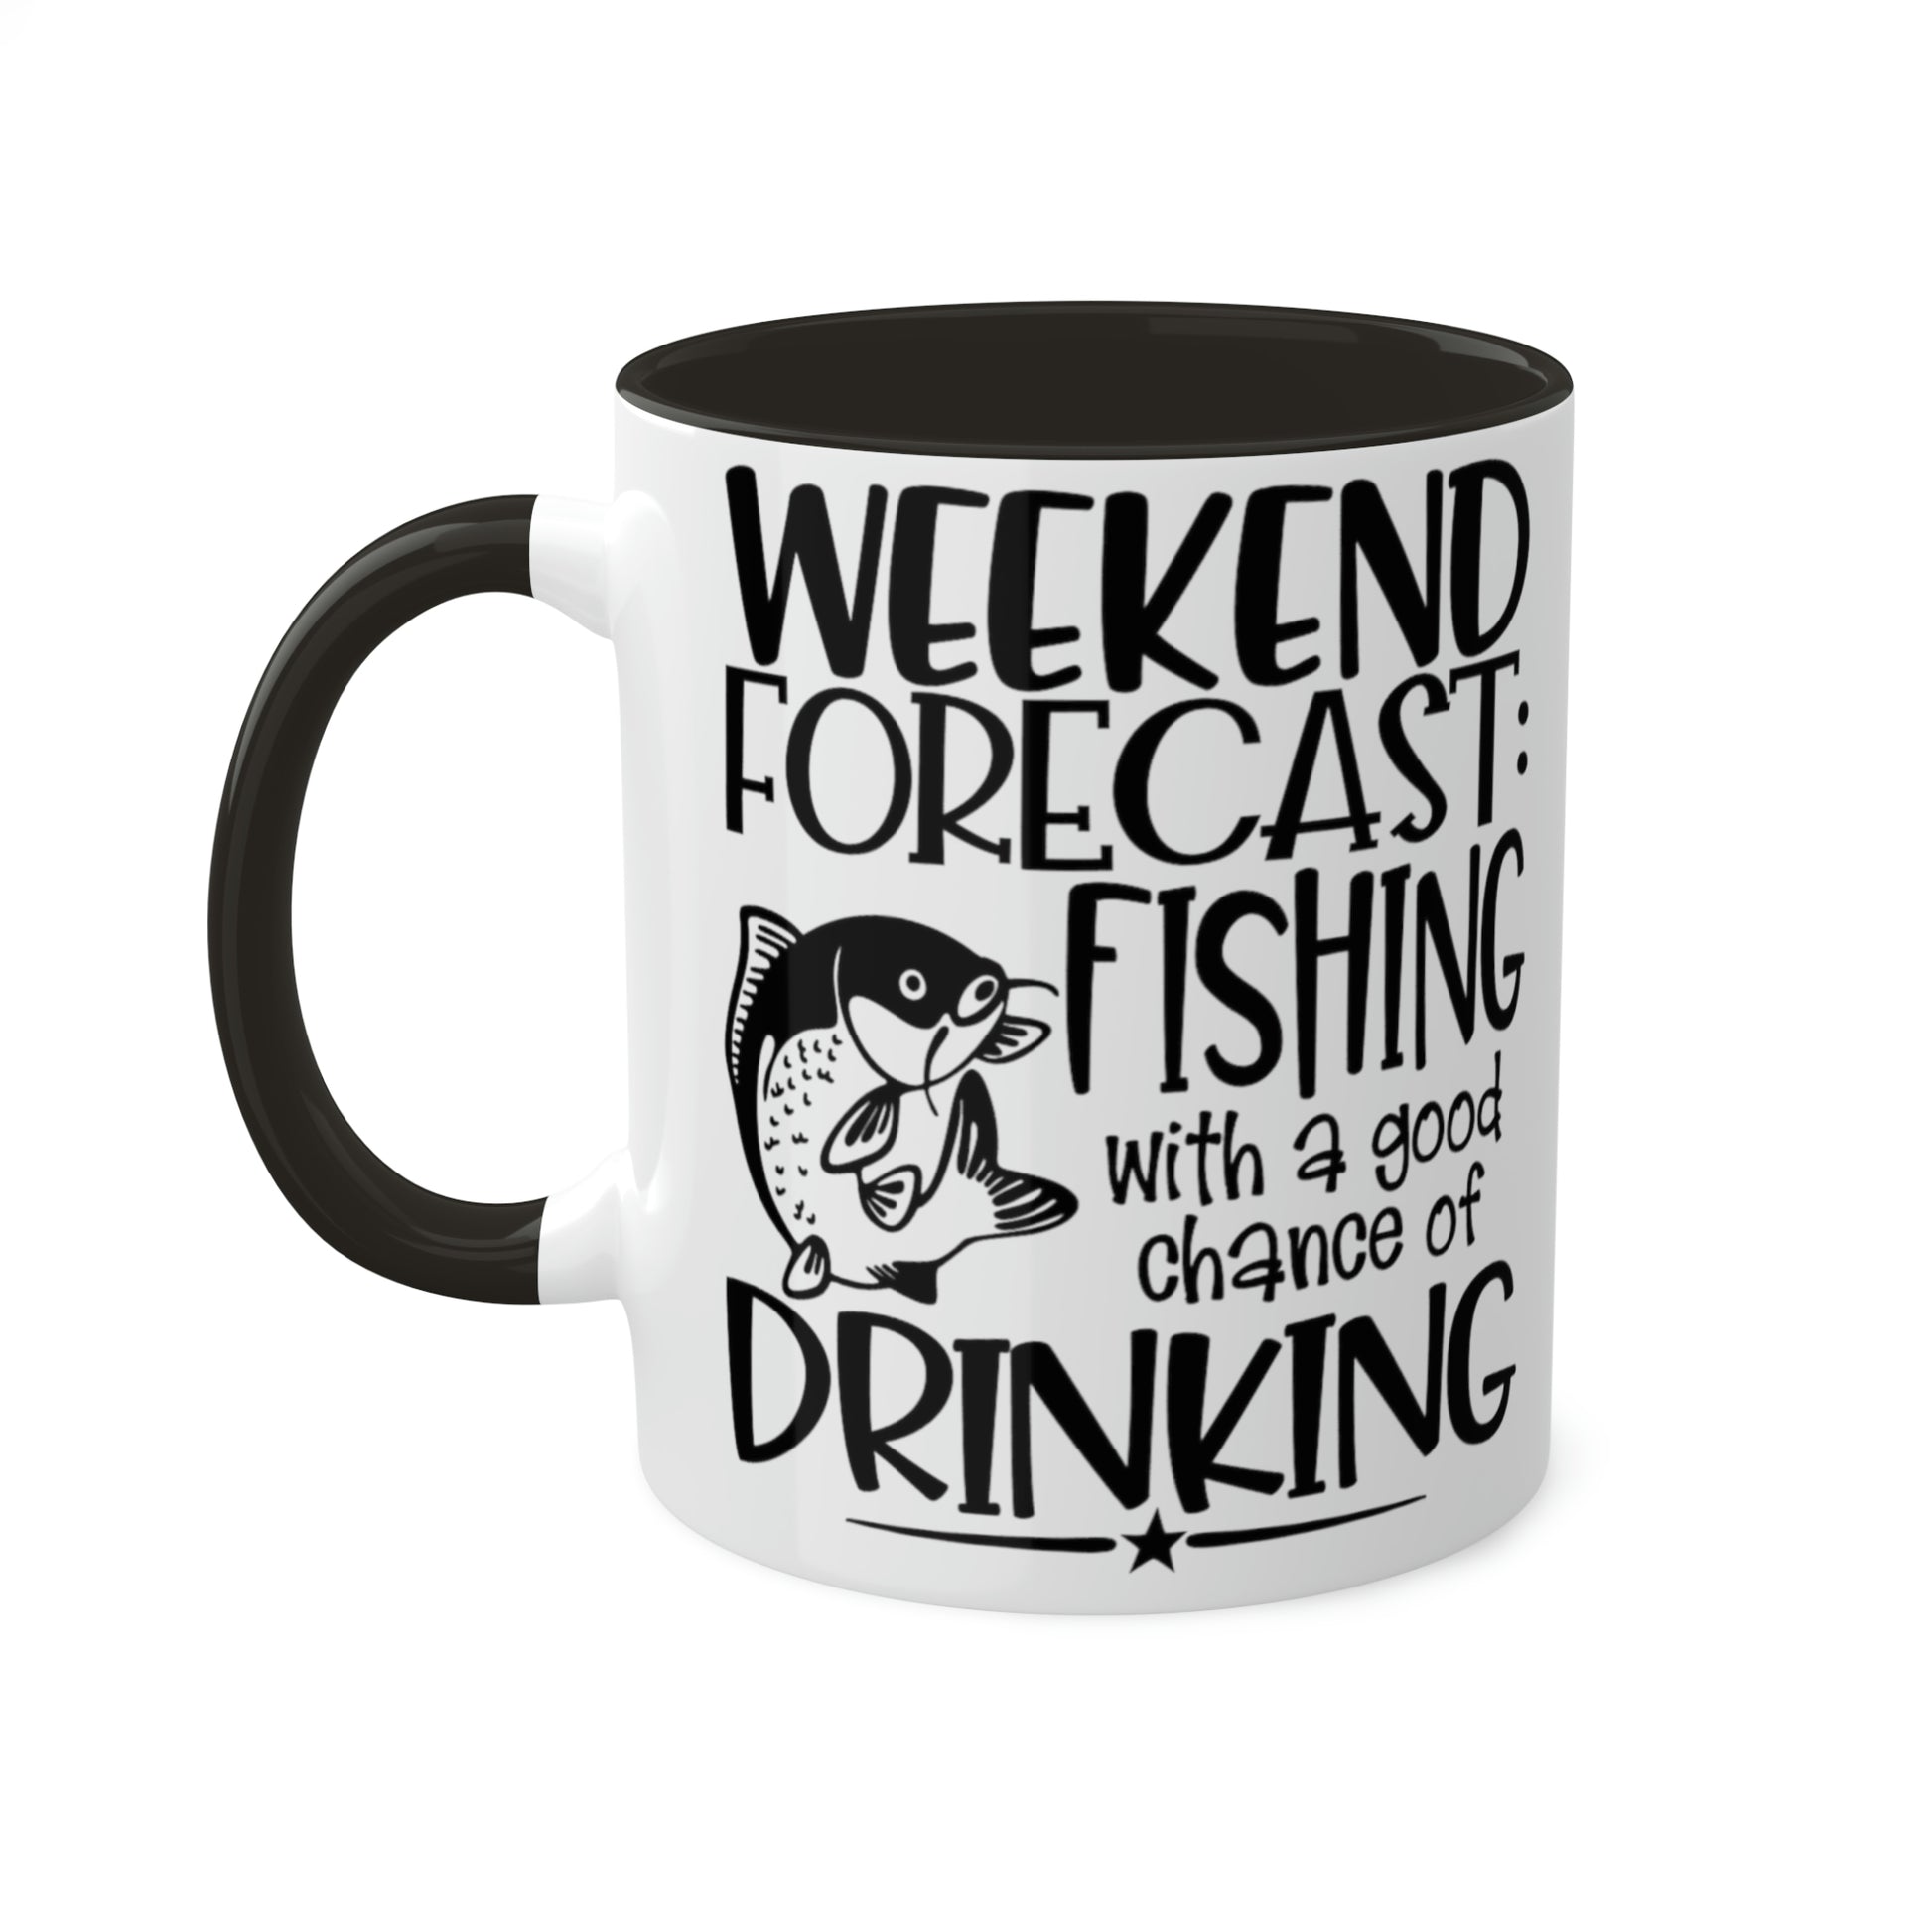 weekend-forecast-fishing-with-a-good-chance-of-drinking-glossy-mug-11-oz-orca-coating-left-side